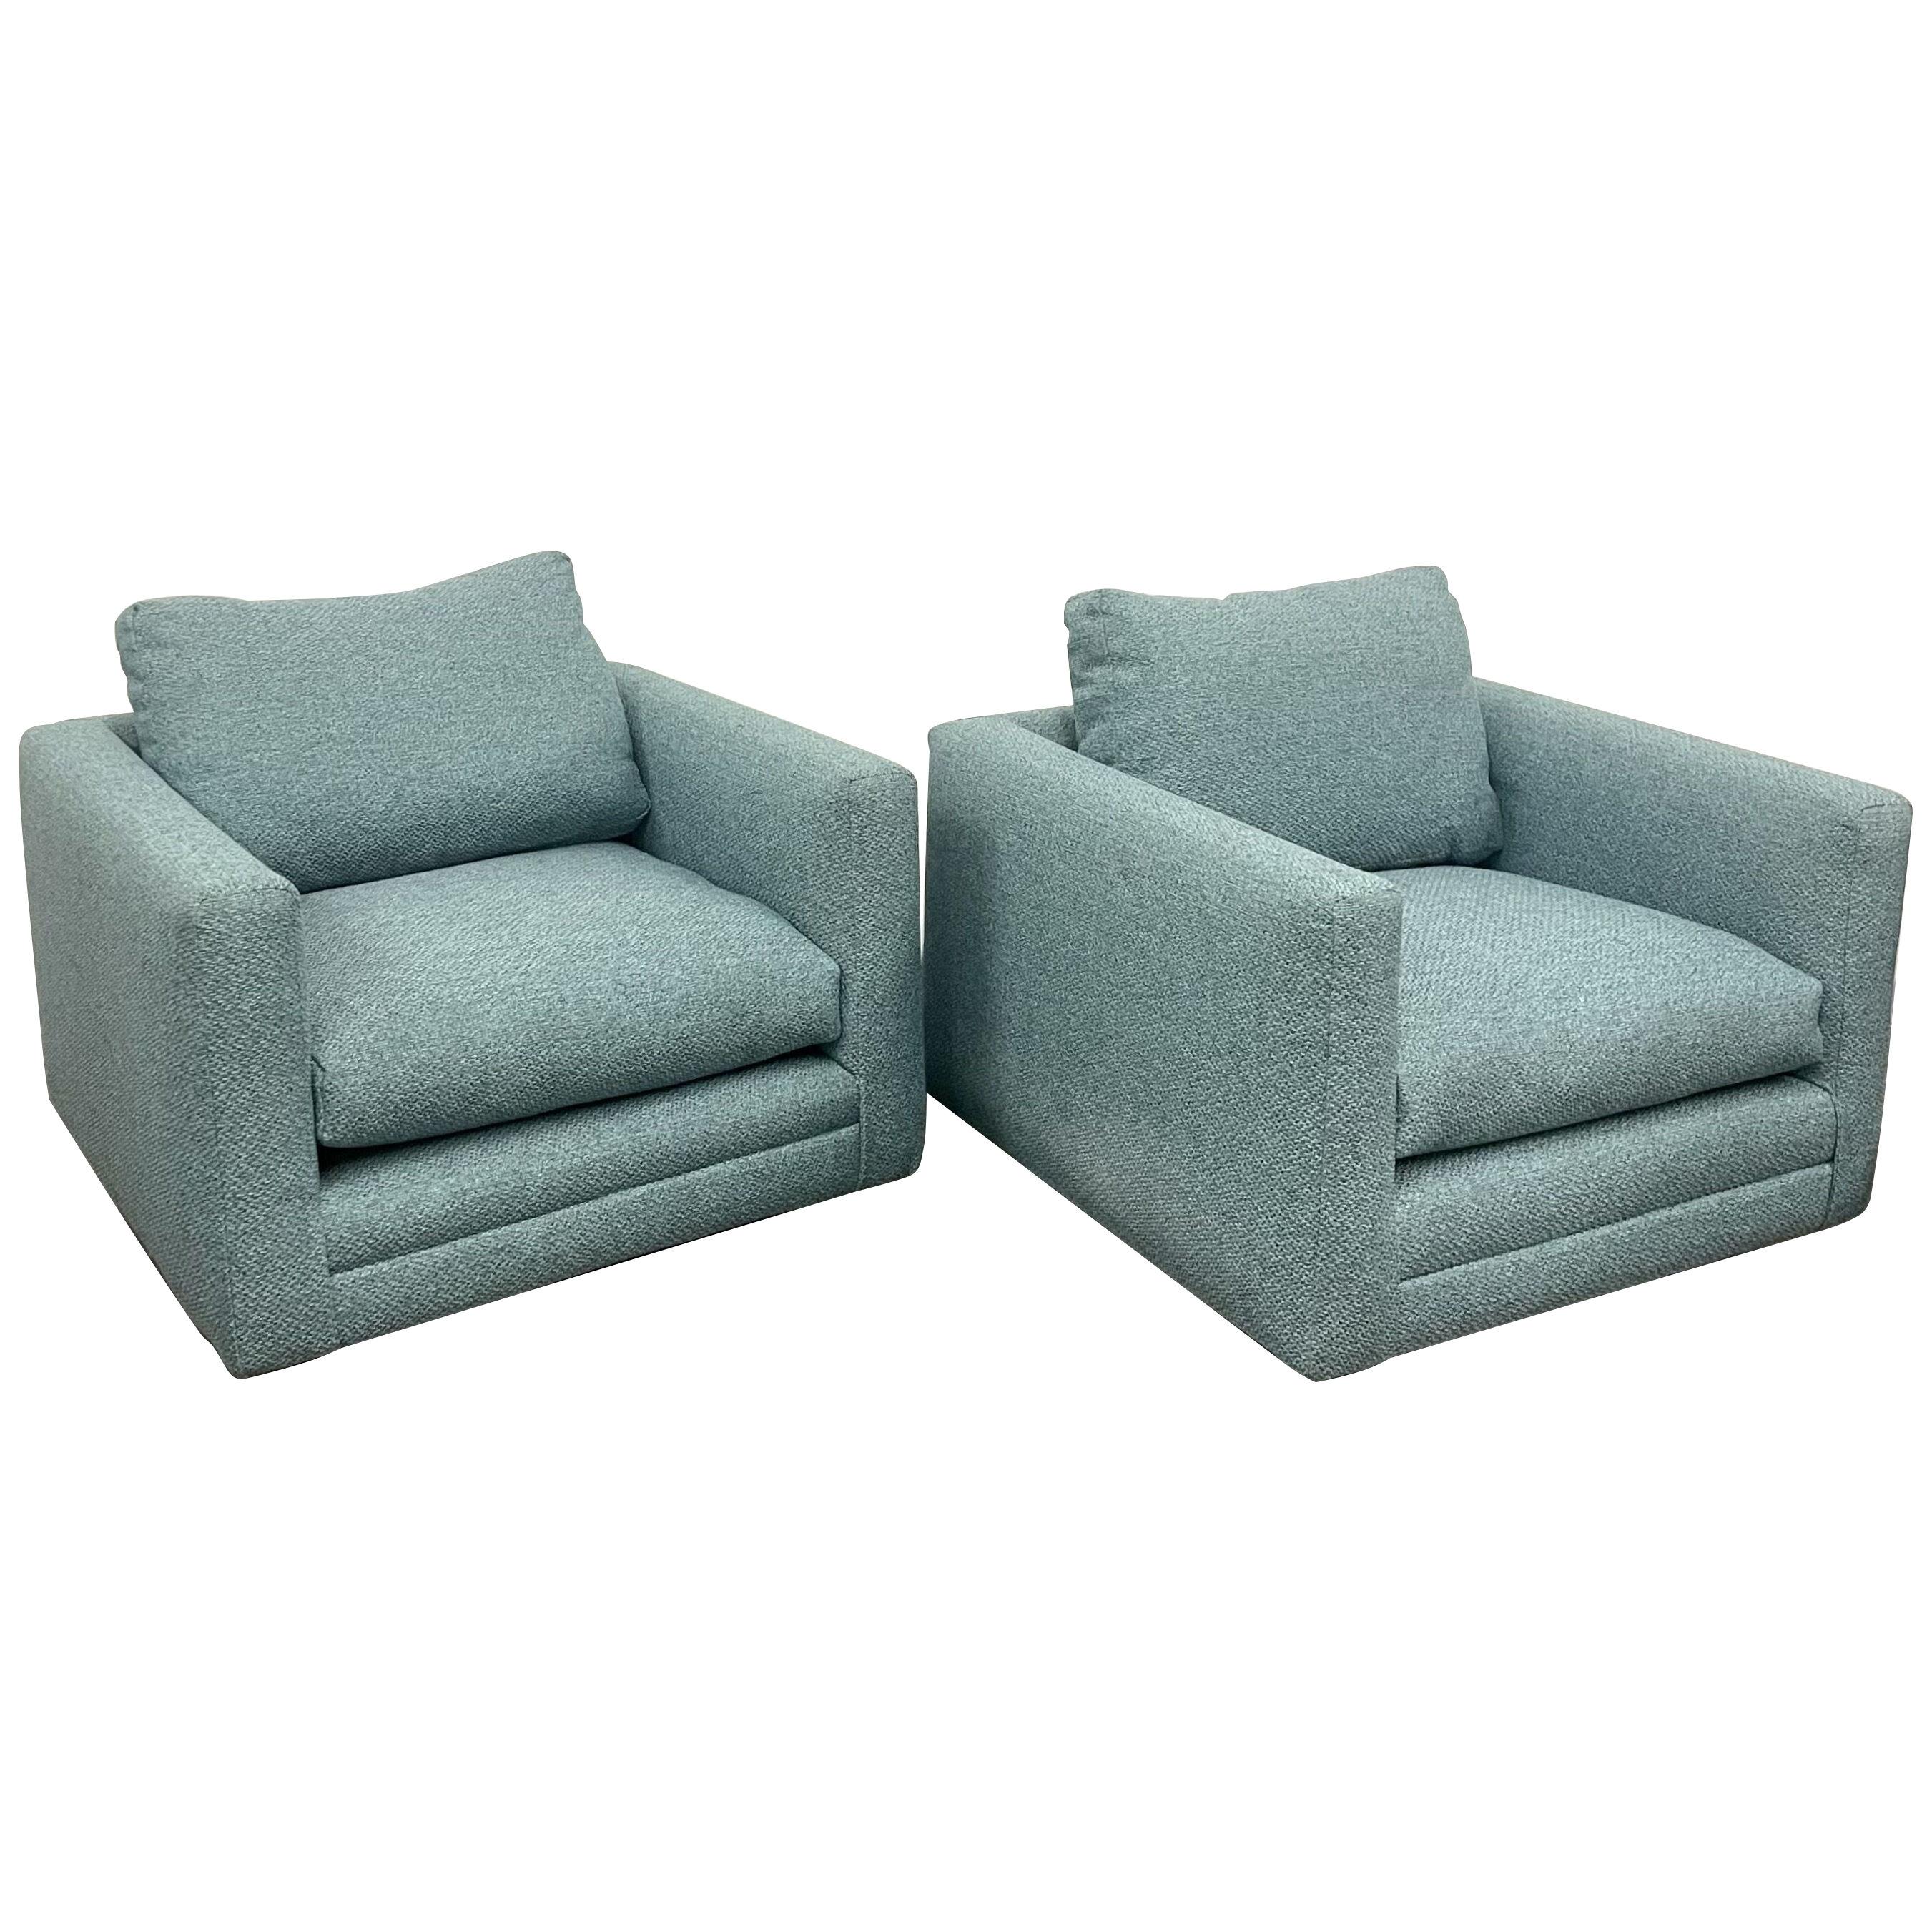 Pair Teal Milo Baughman Style Mid Century Modern Lounge Chairs, Swivel, Square